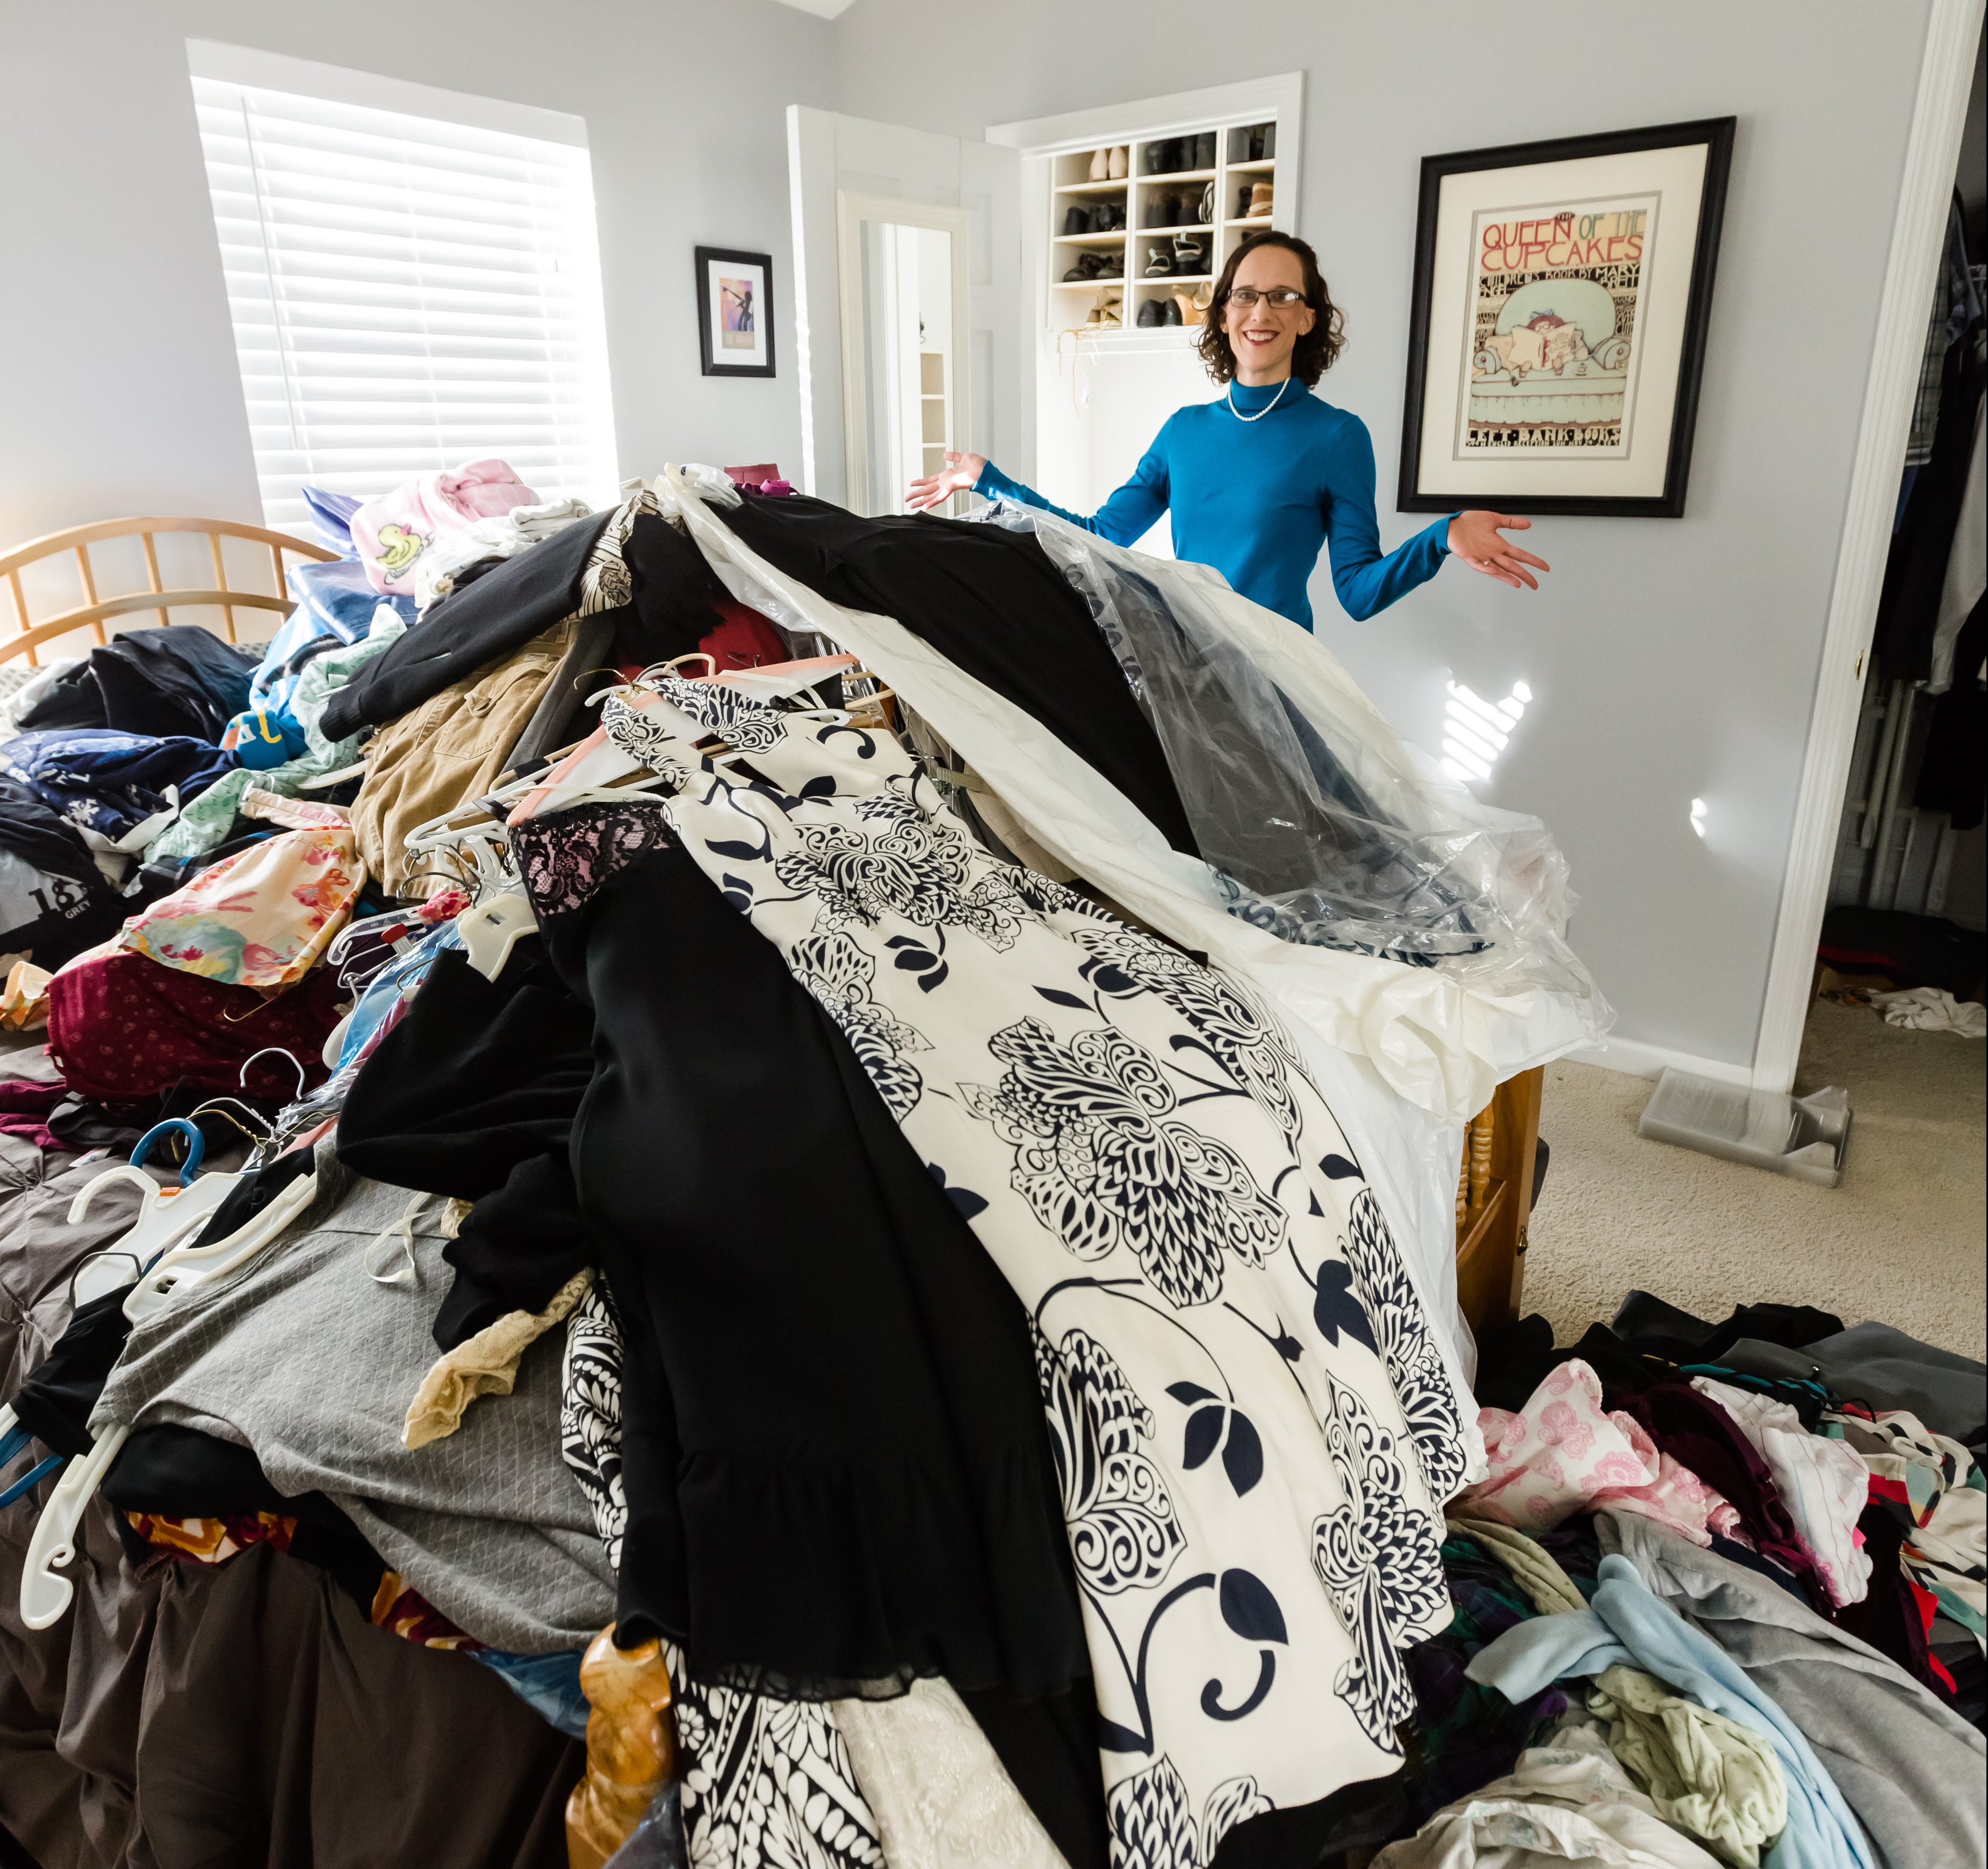 Learn common organizing mistakes to avoid